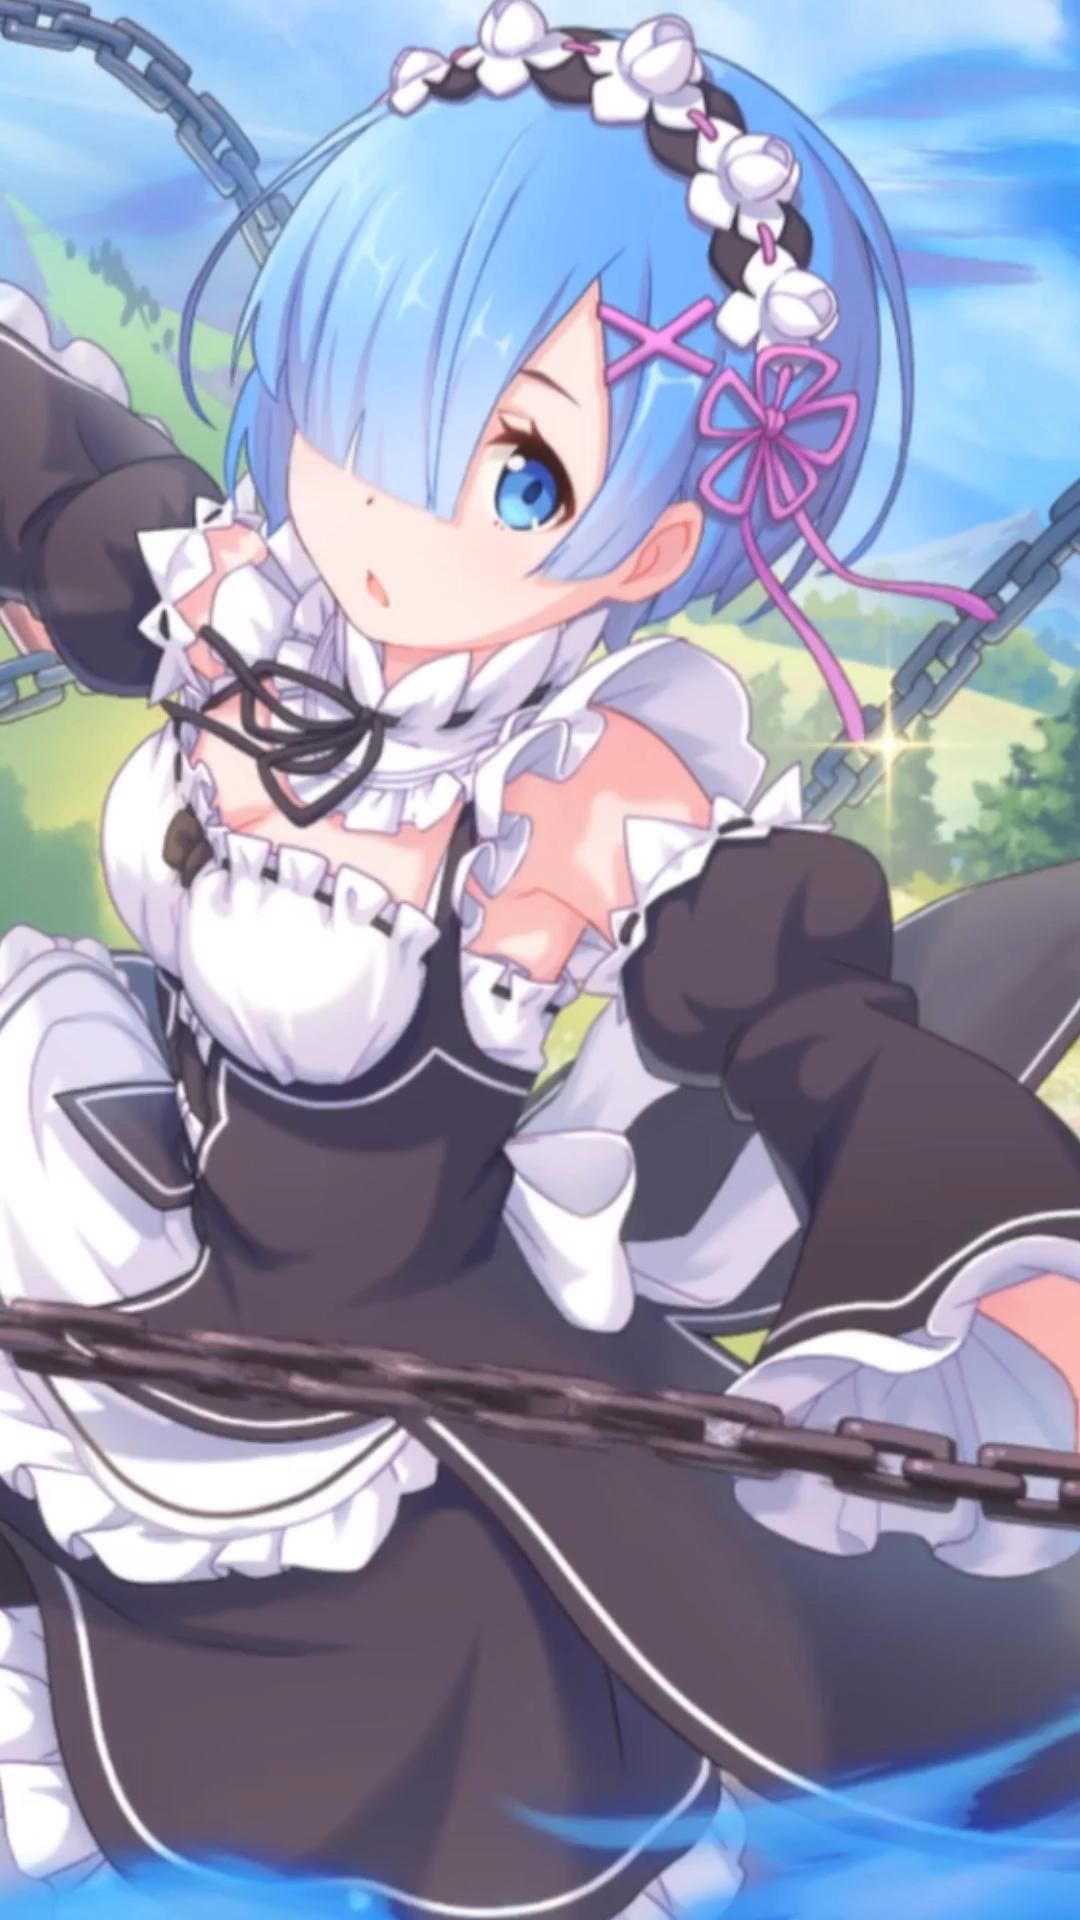 Rem from Re:Zero live wallpaper. Rem (レム) is one of the twin maids working for Roswaal L Mathers. #anime #waifu #rem #re:. Anime, Anime maid, Anime wallpaper live